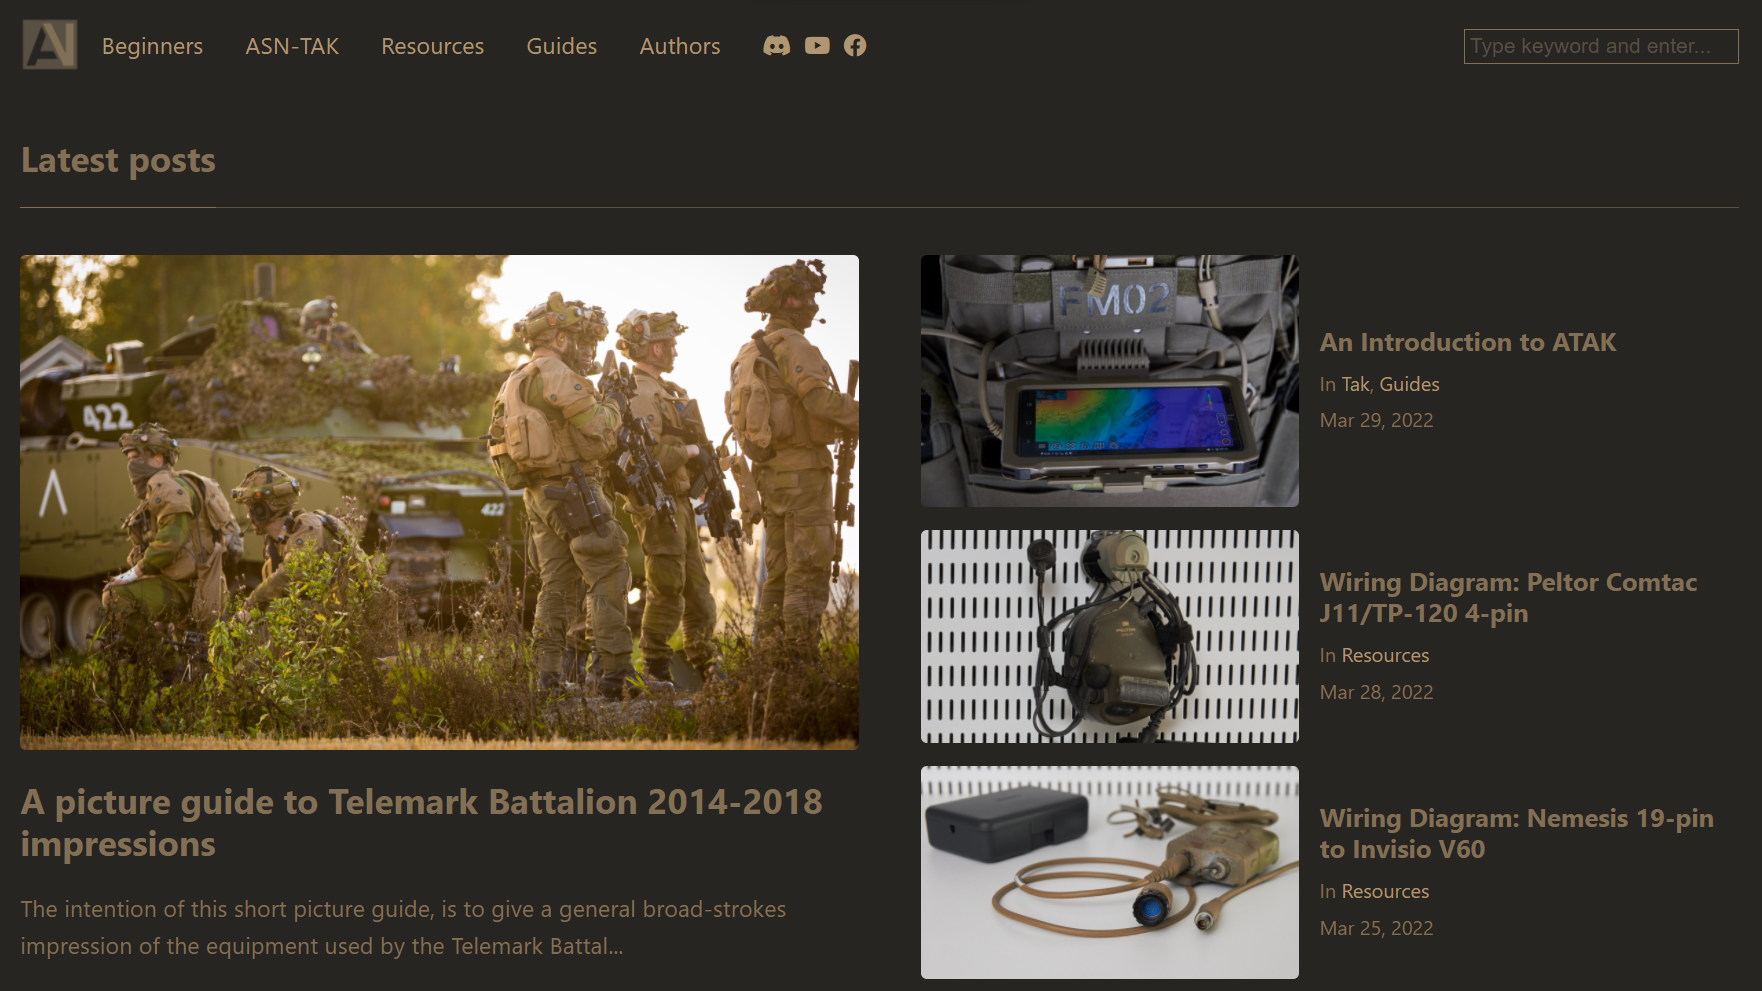 AirsoftNorge is back!